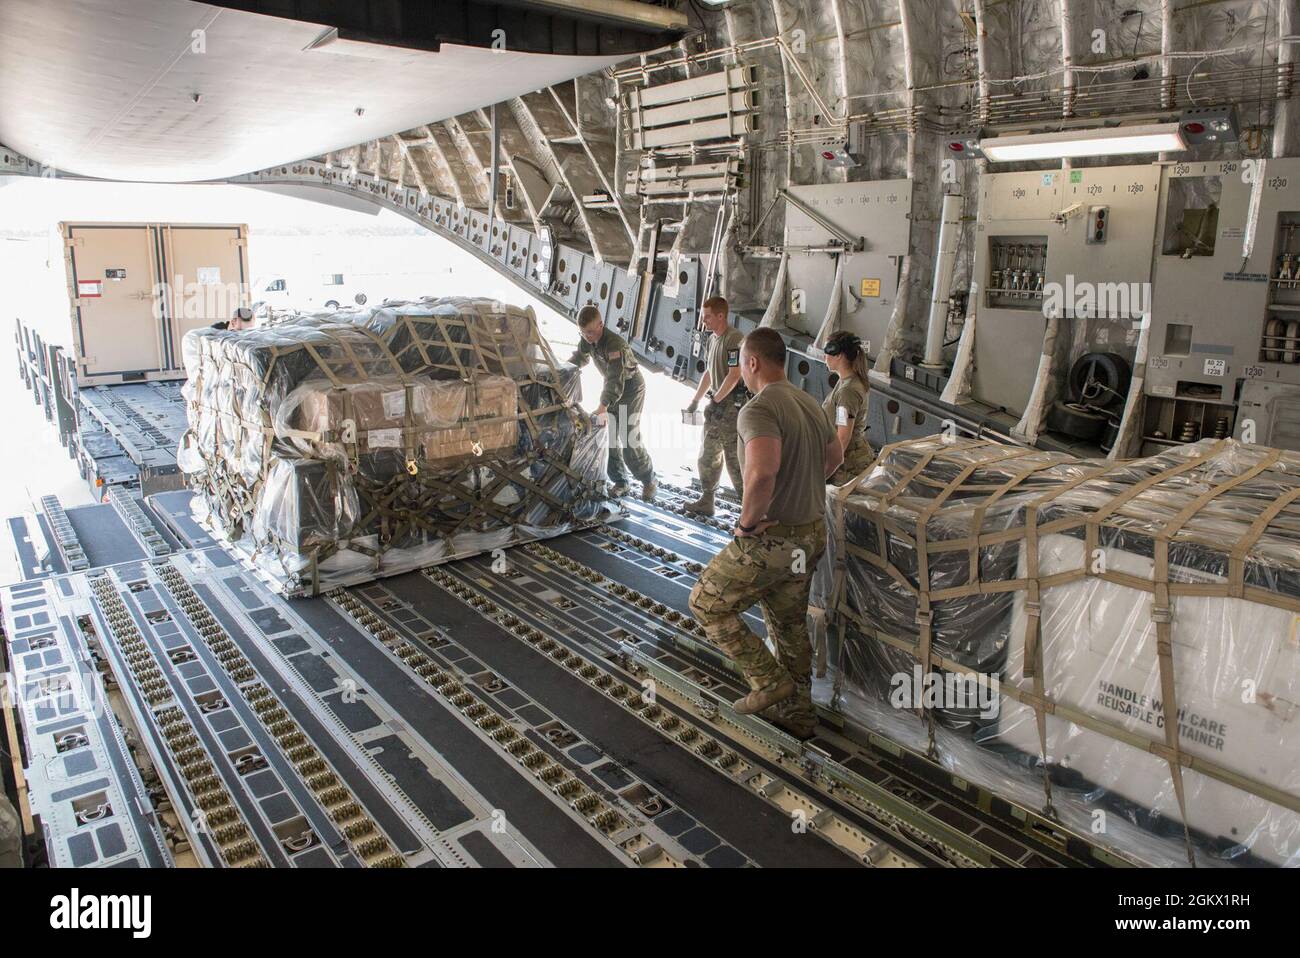 Aerial transportation specialists and loadmasters from the 167th Airlift Wing, West Virginia National Guard and 123rd Airlift Wing, Kentucky National Guard, load palletized cargo onto a C-17 Globemaster III aircraft during a cargo loading exercise at the 167th Airlift Wing, Martinsburg, West Virginia, Jul. 14, 2021. The 167th hosted members from the 123rd for a small air terminal training in preparation for their upcoming deployment. Stock Photo